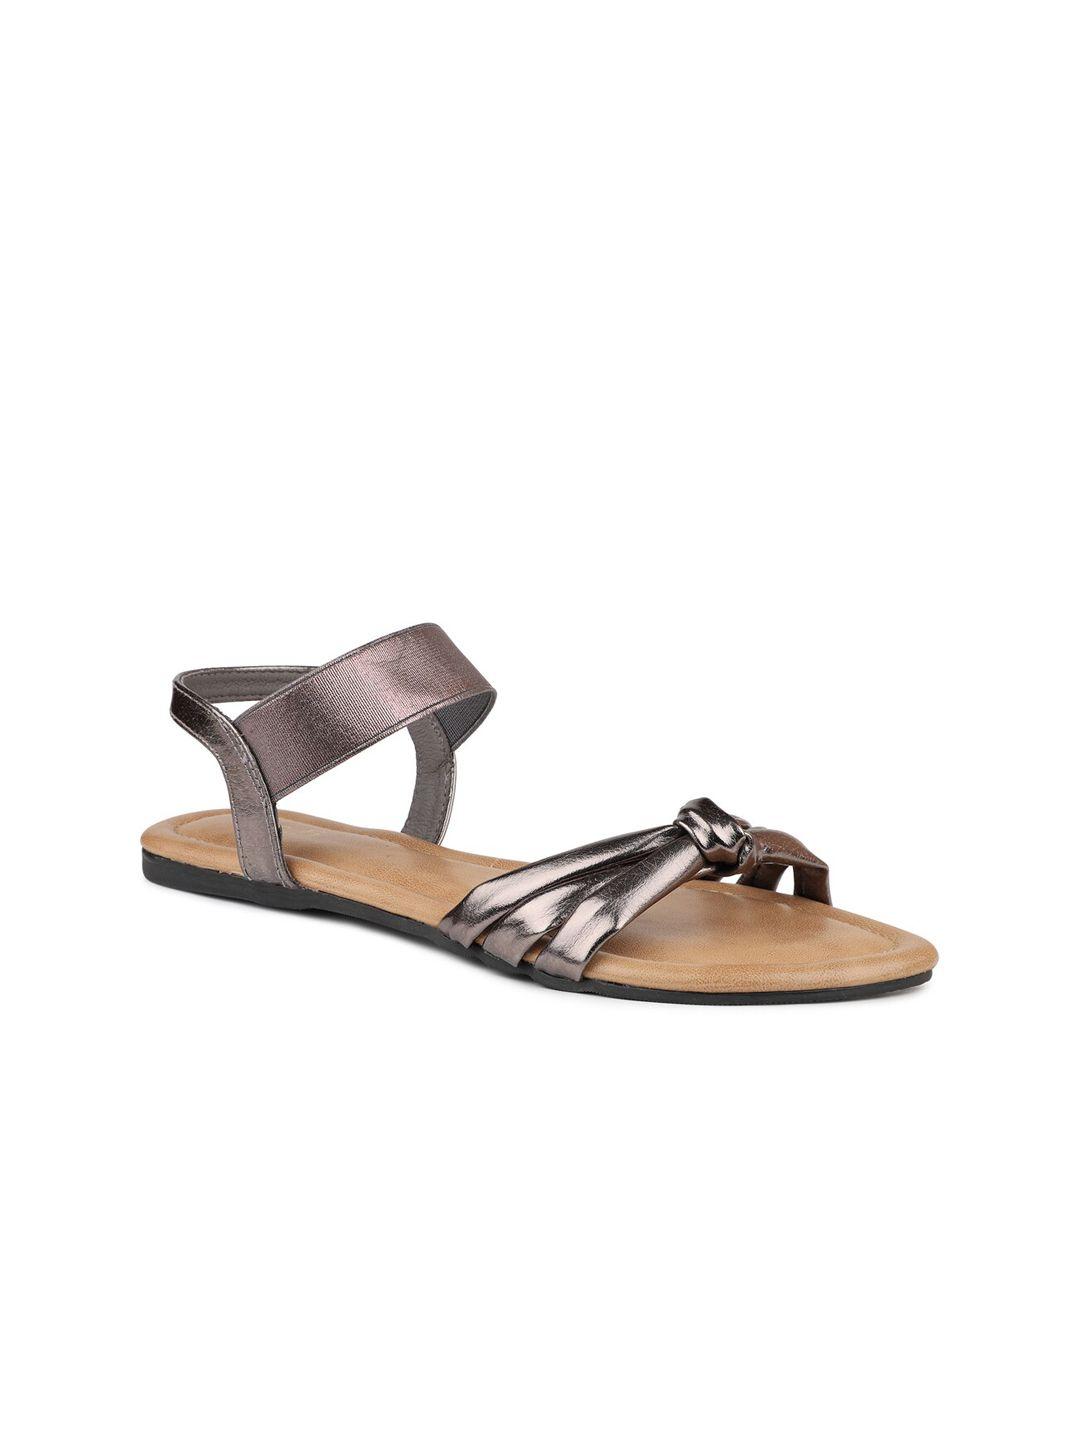 inc-5-knotted-open-toe-flats-with-backstrap